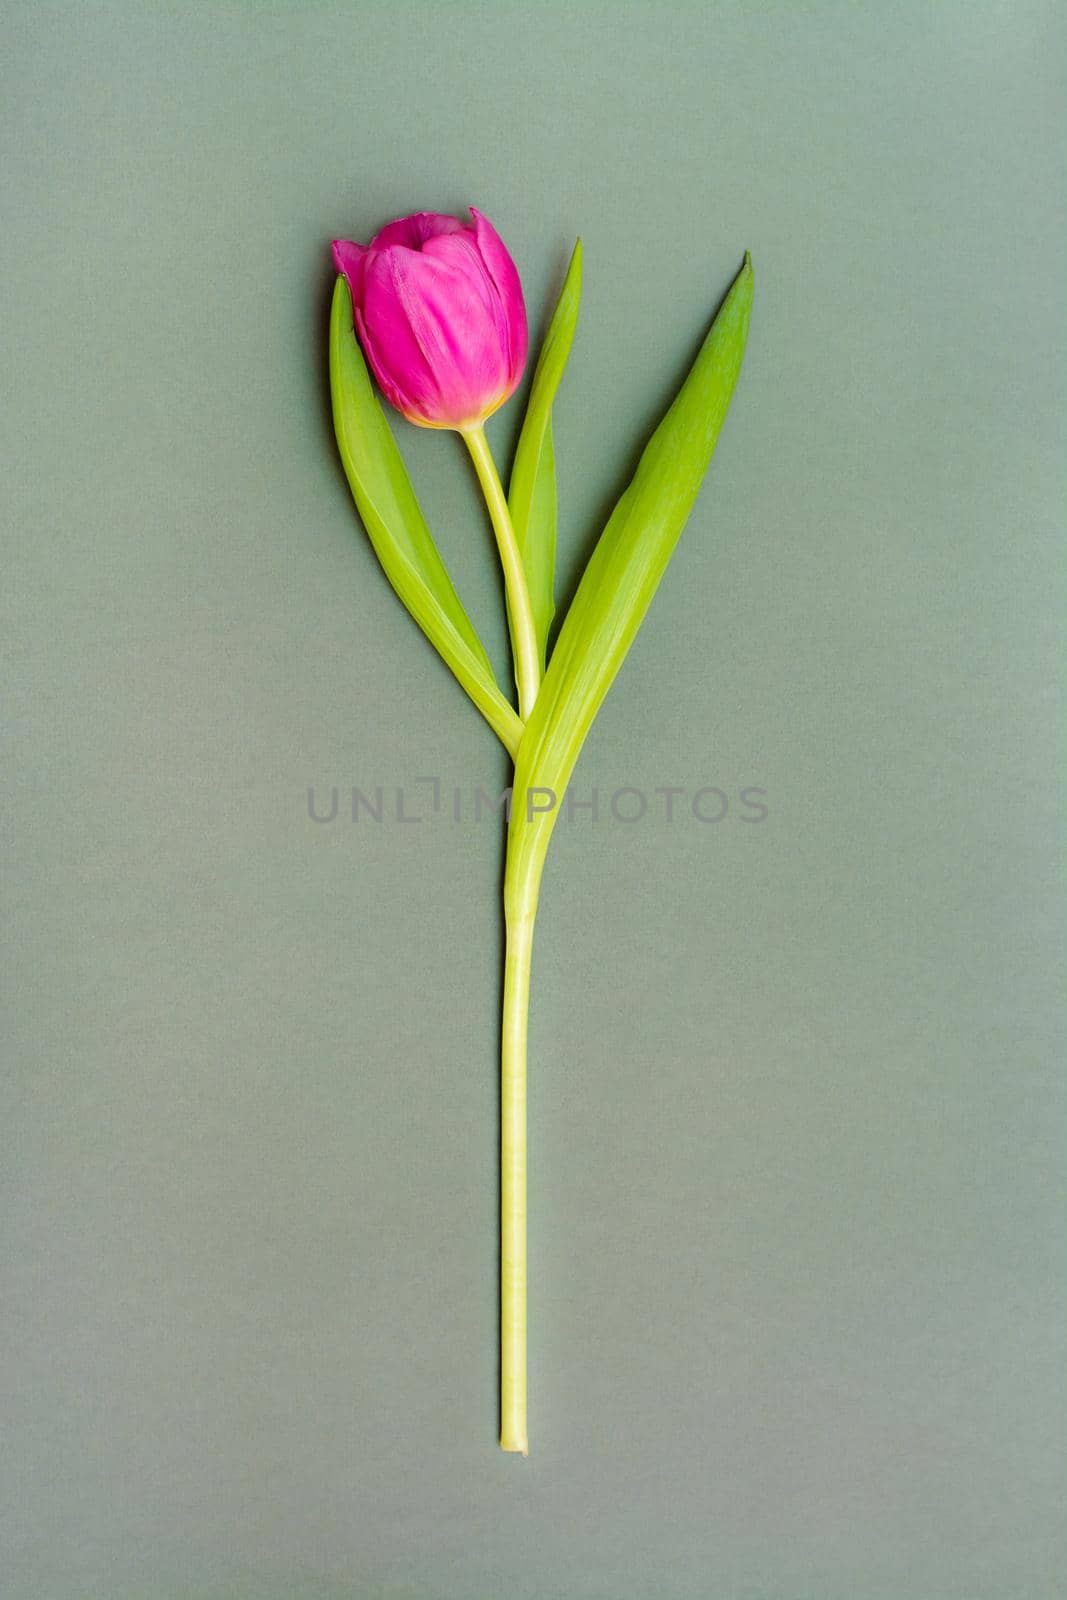 Lonely pink tulip with green leaves on a solid dark background. Copy space. Vertical view